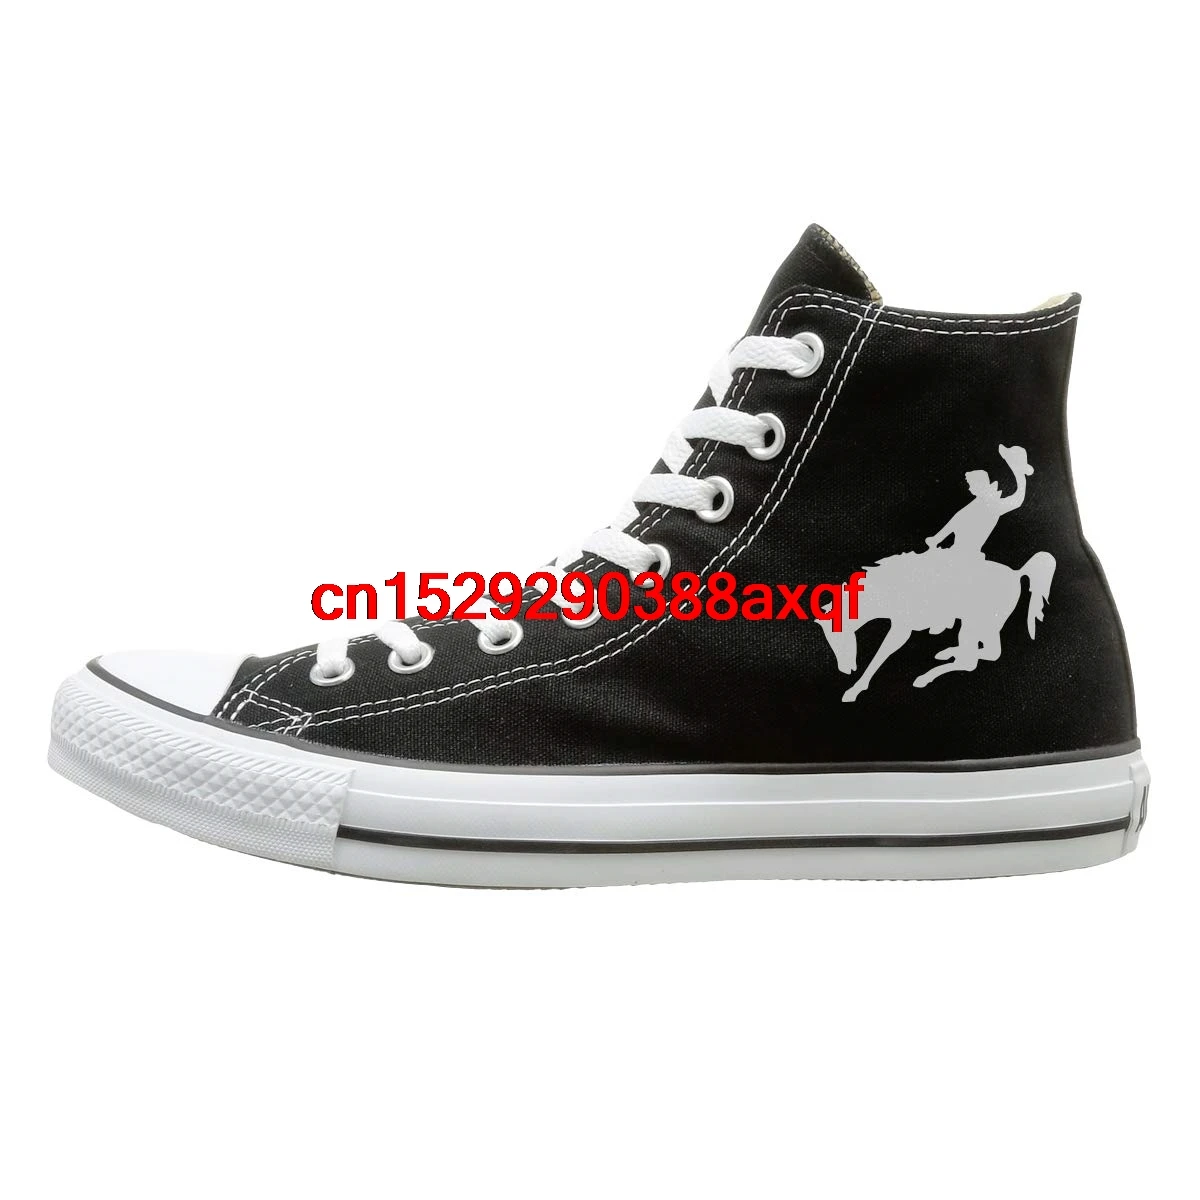 

Canvas Shoes Horse Riding Casual High-Top Lace Ups Sport Sneakers For Men's Women's